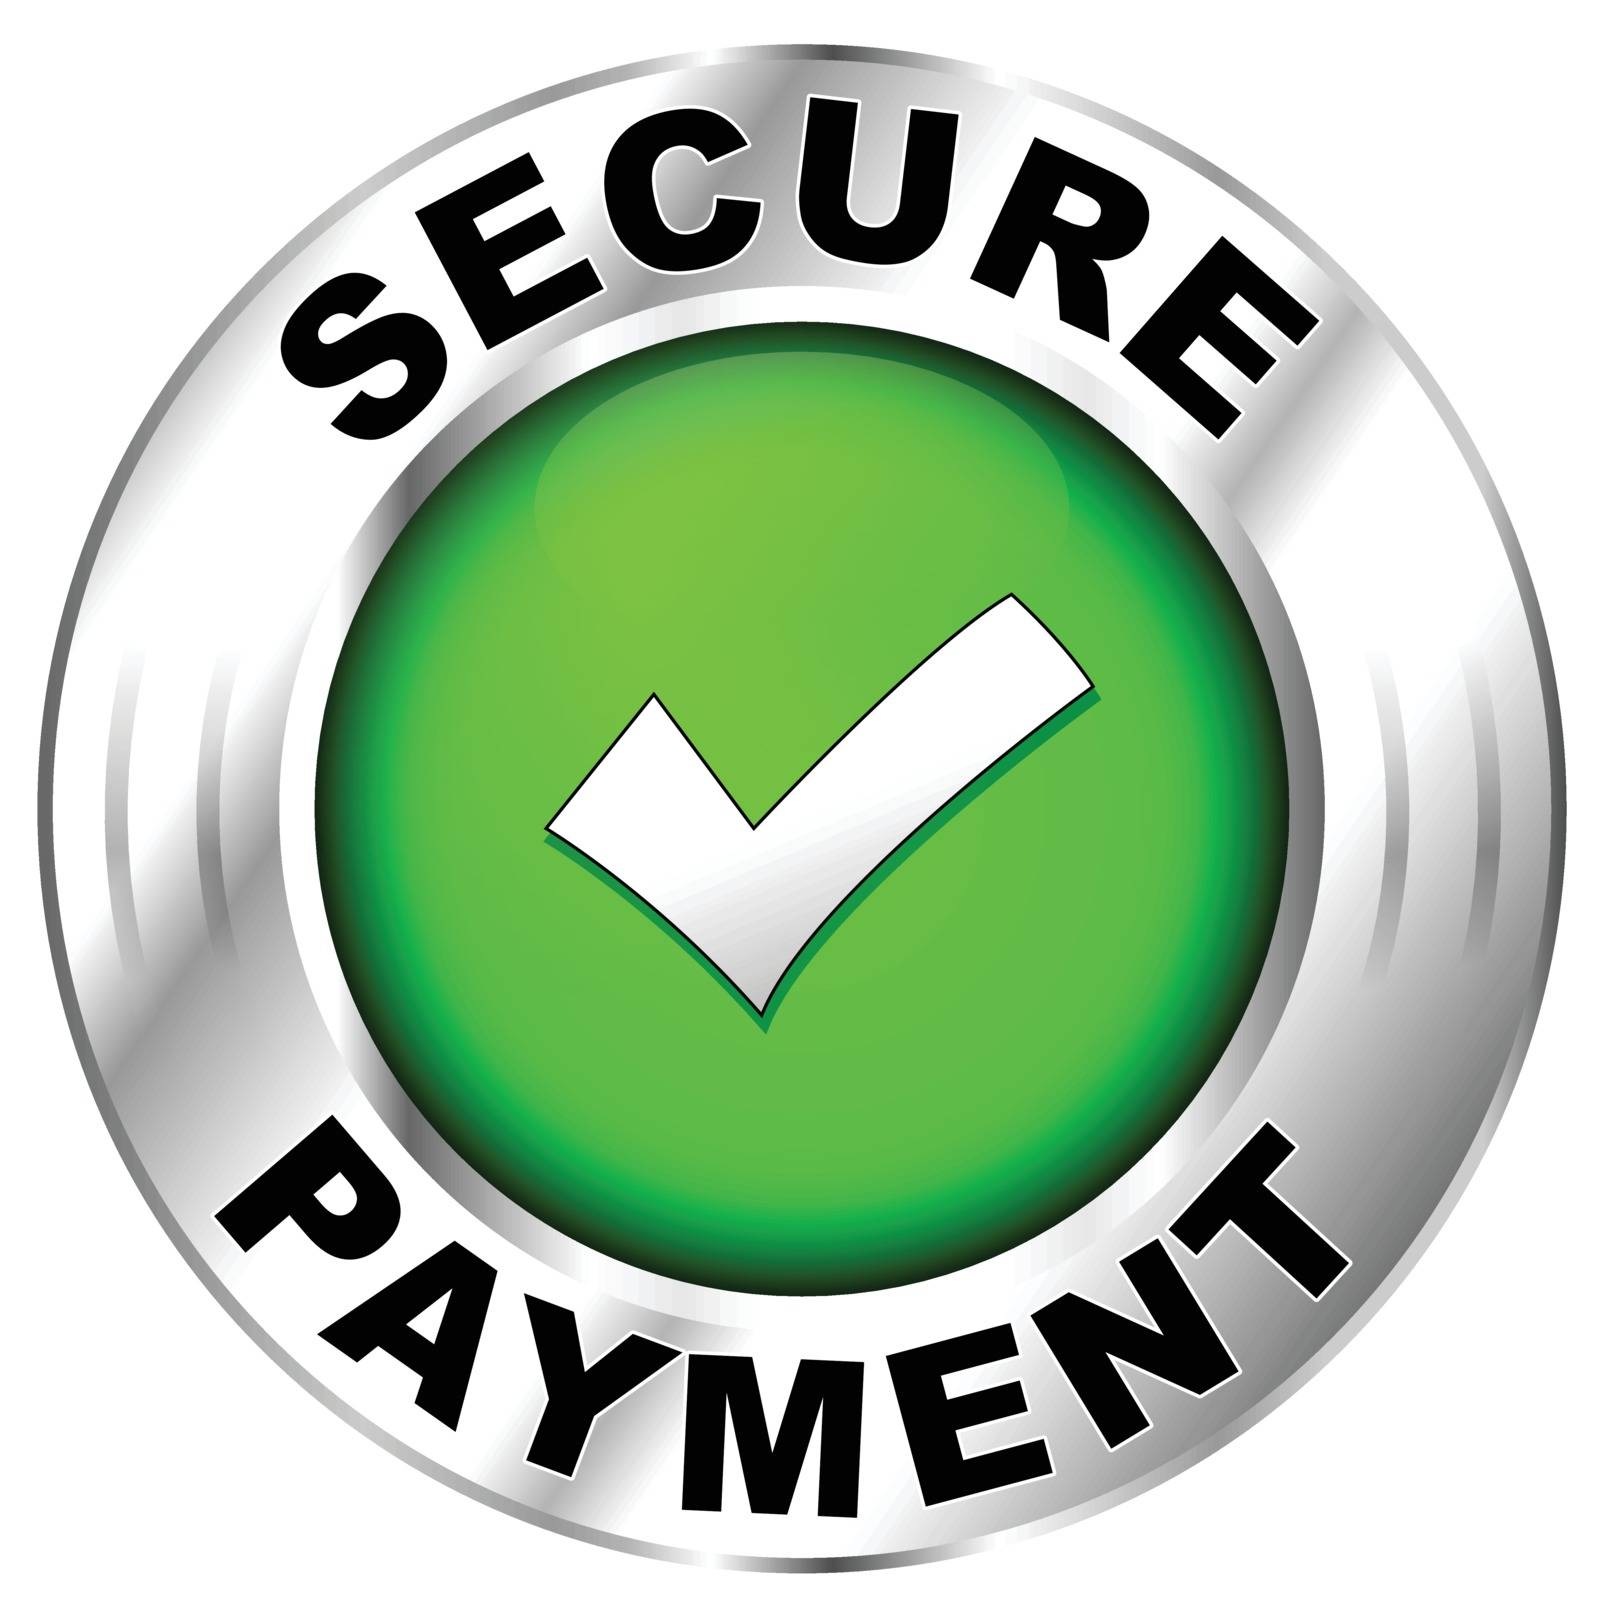 secure payment label by nickylarson974